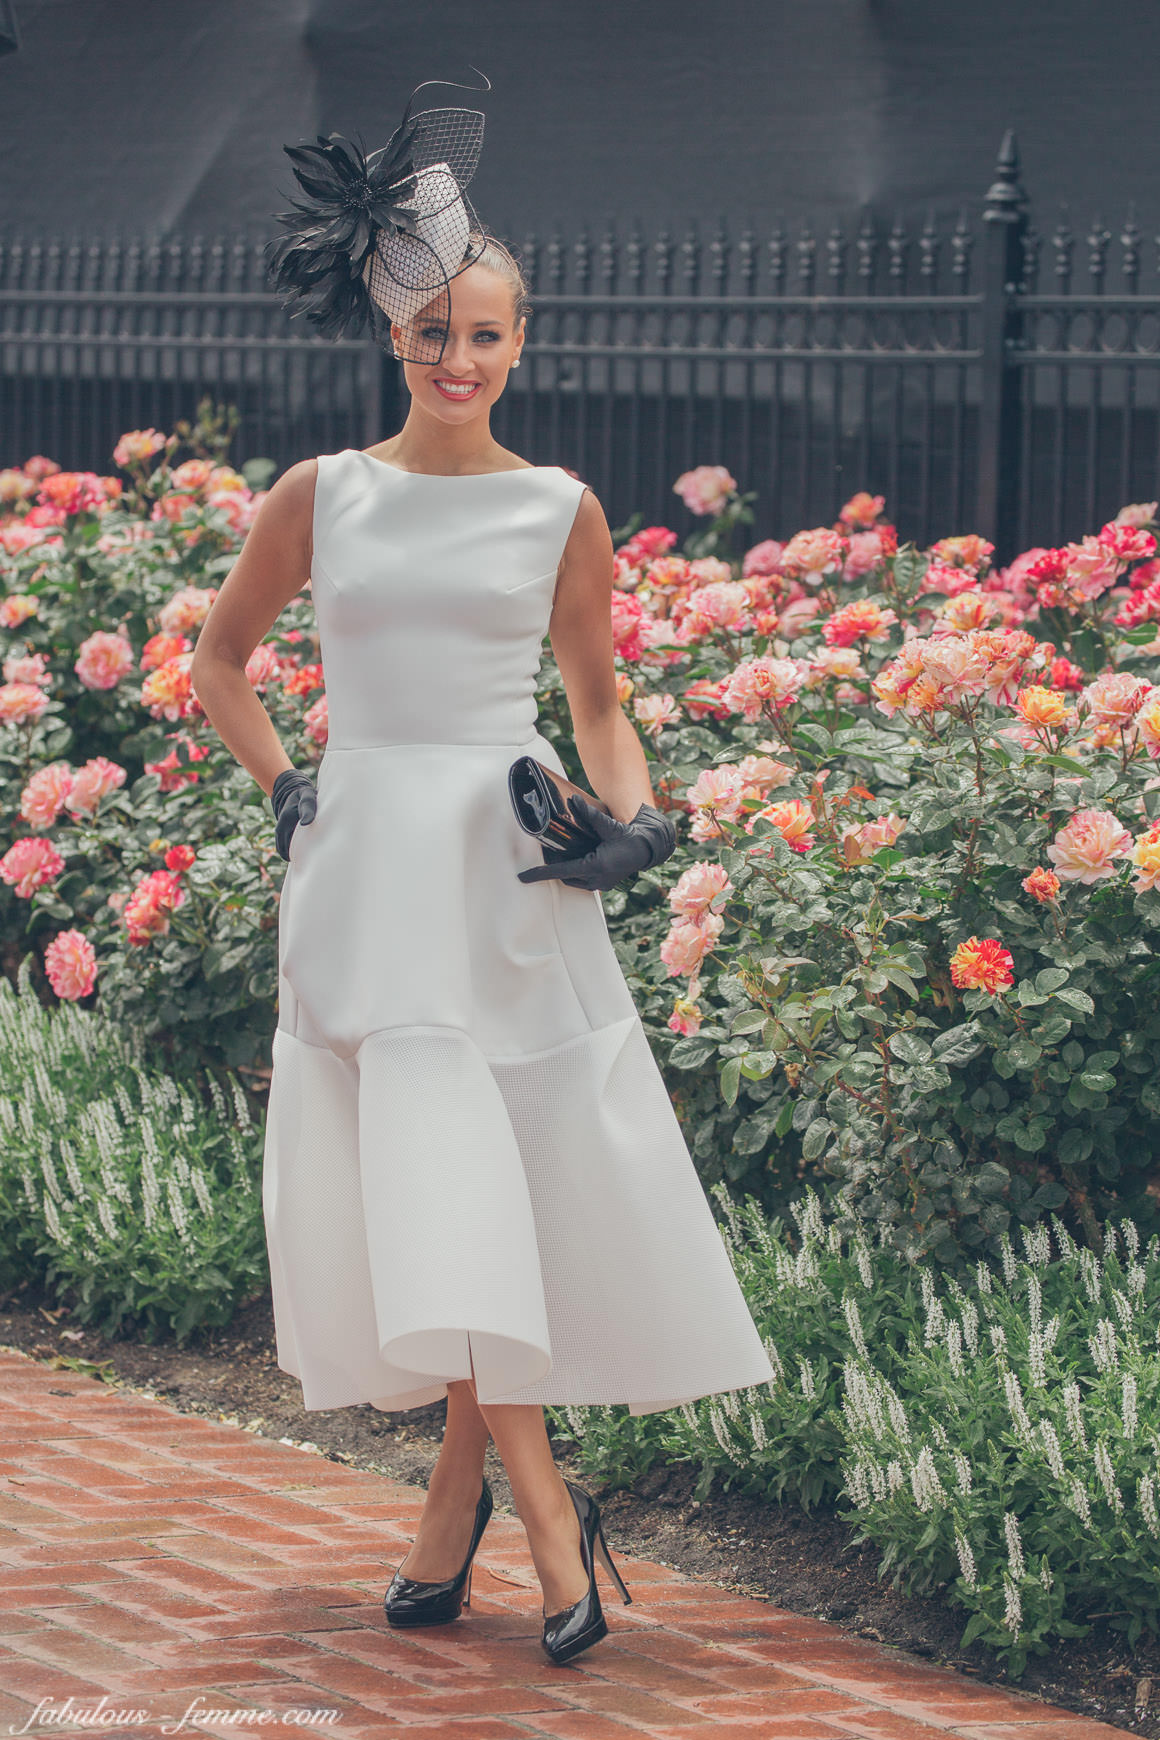  fashion competitions at the melbourne spring racing carnival - winner 2014